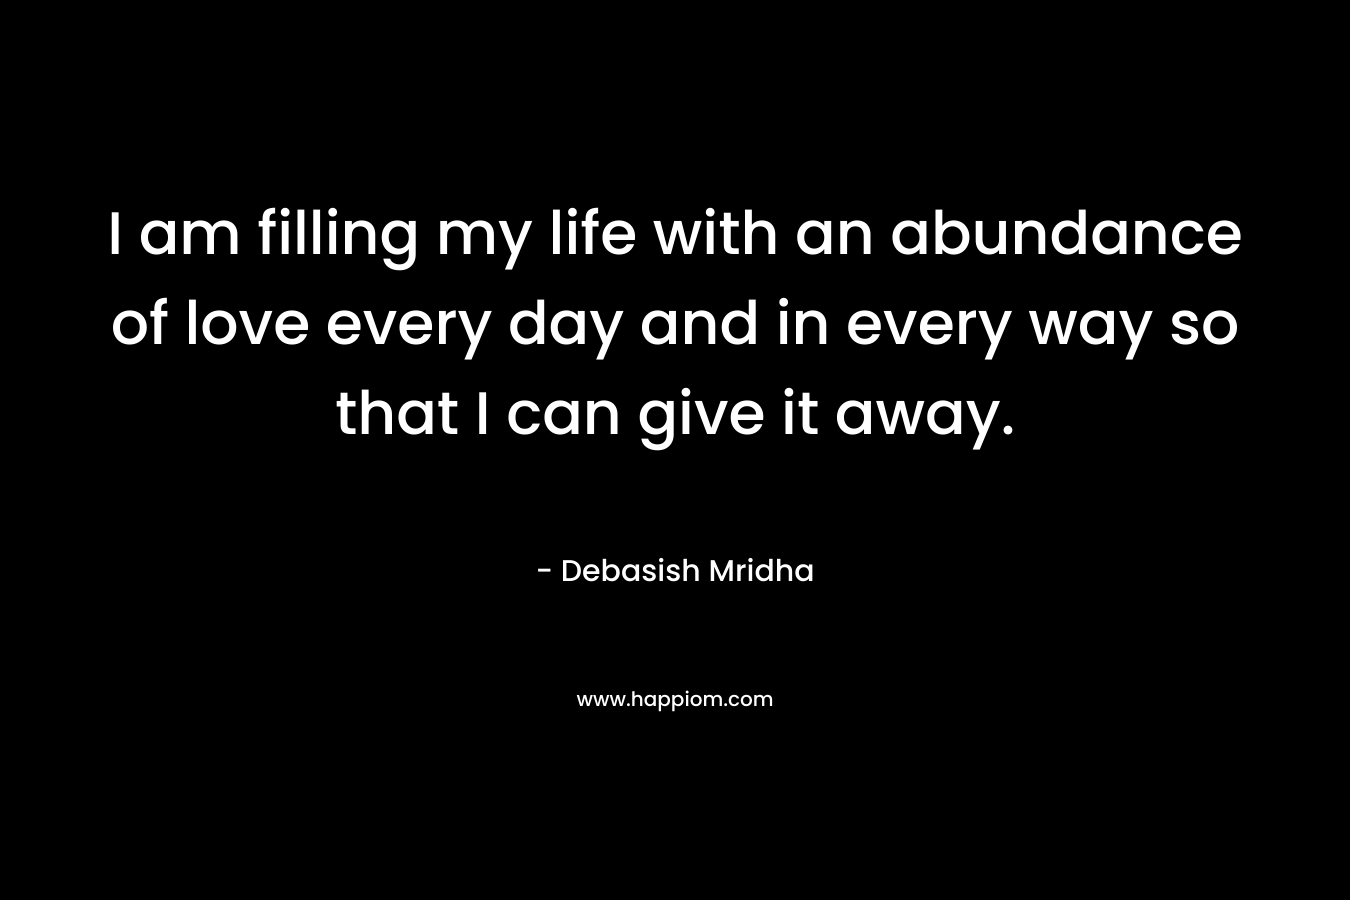 I am filling my life with an abundance of love every day and in every way so that I can give it away.